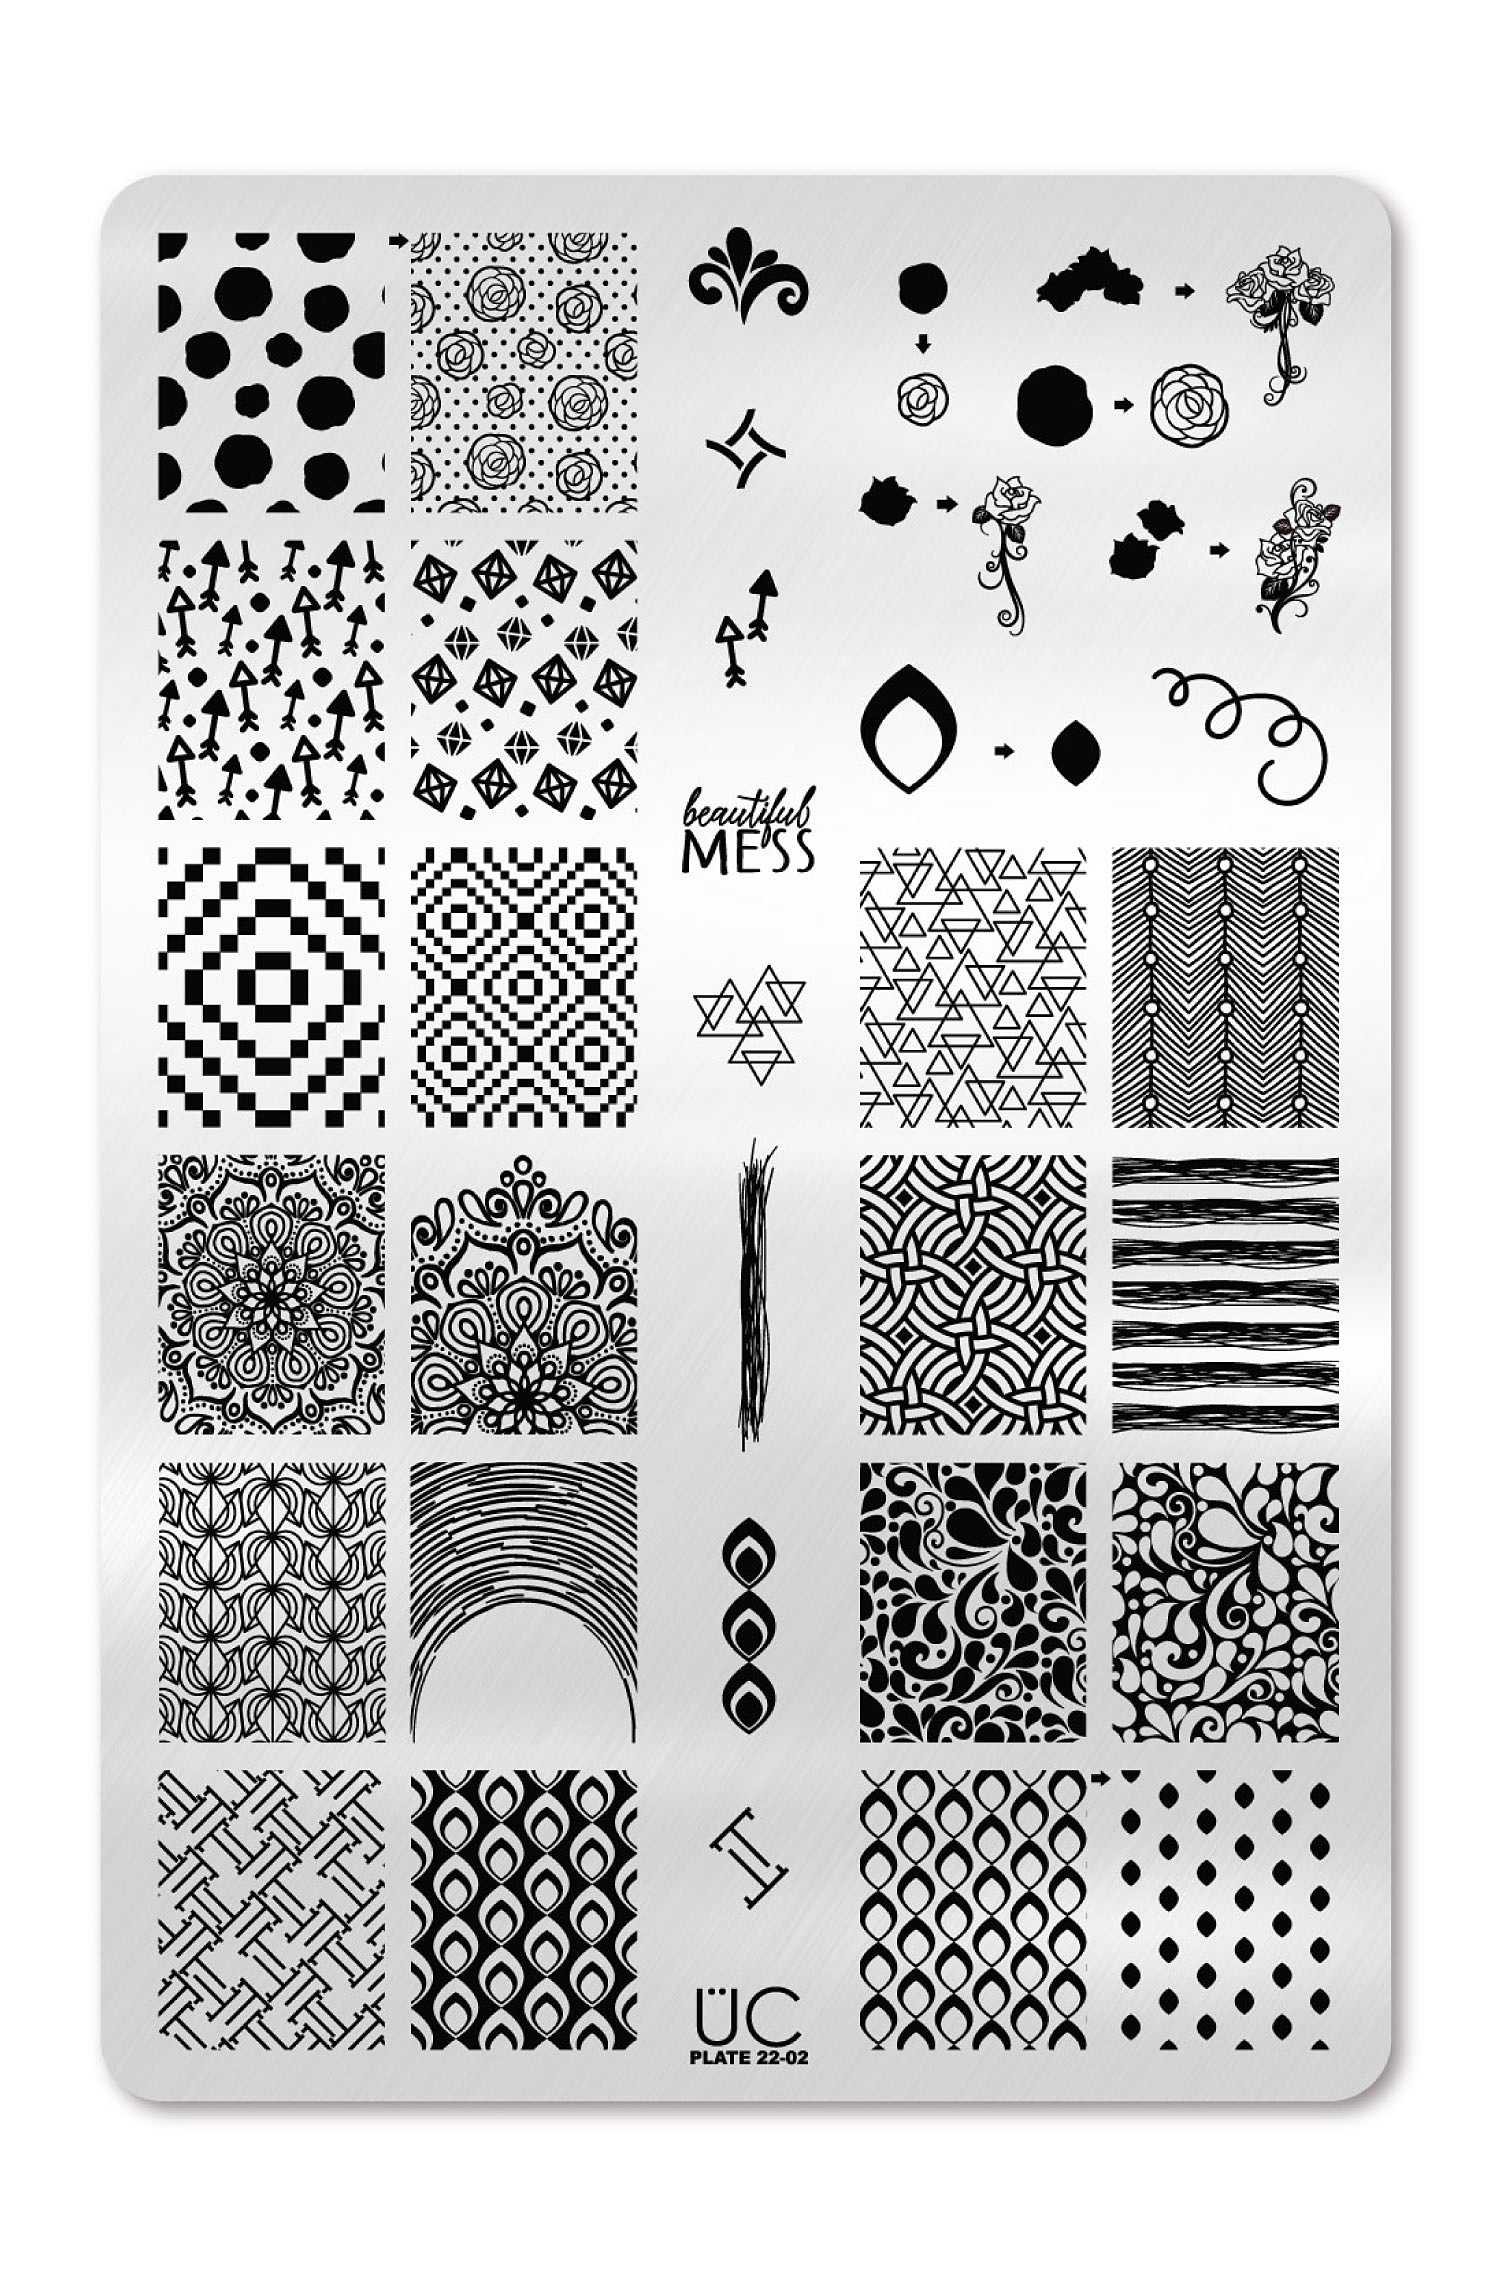 Collection 22 - UberChic Nail Stamping Plates - Includes 3 Unique 